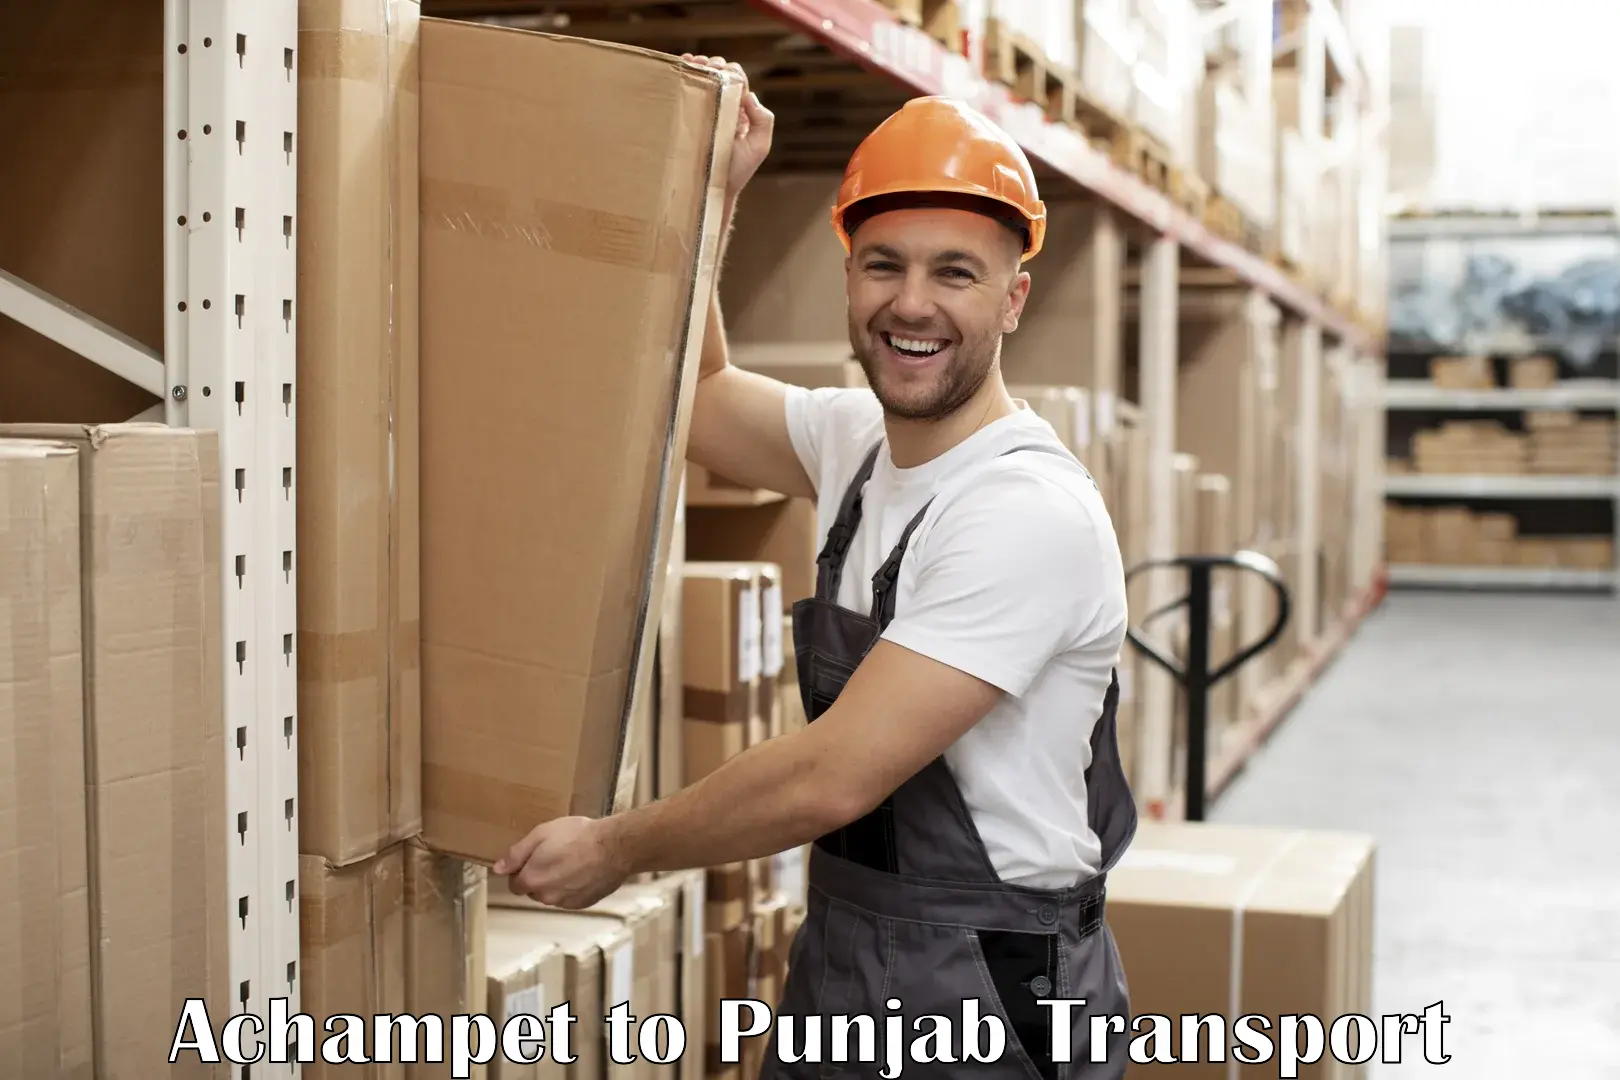 Truck transport companies in India Achampet to Mohali